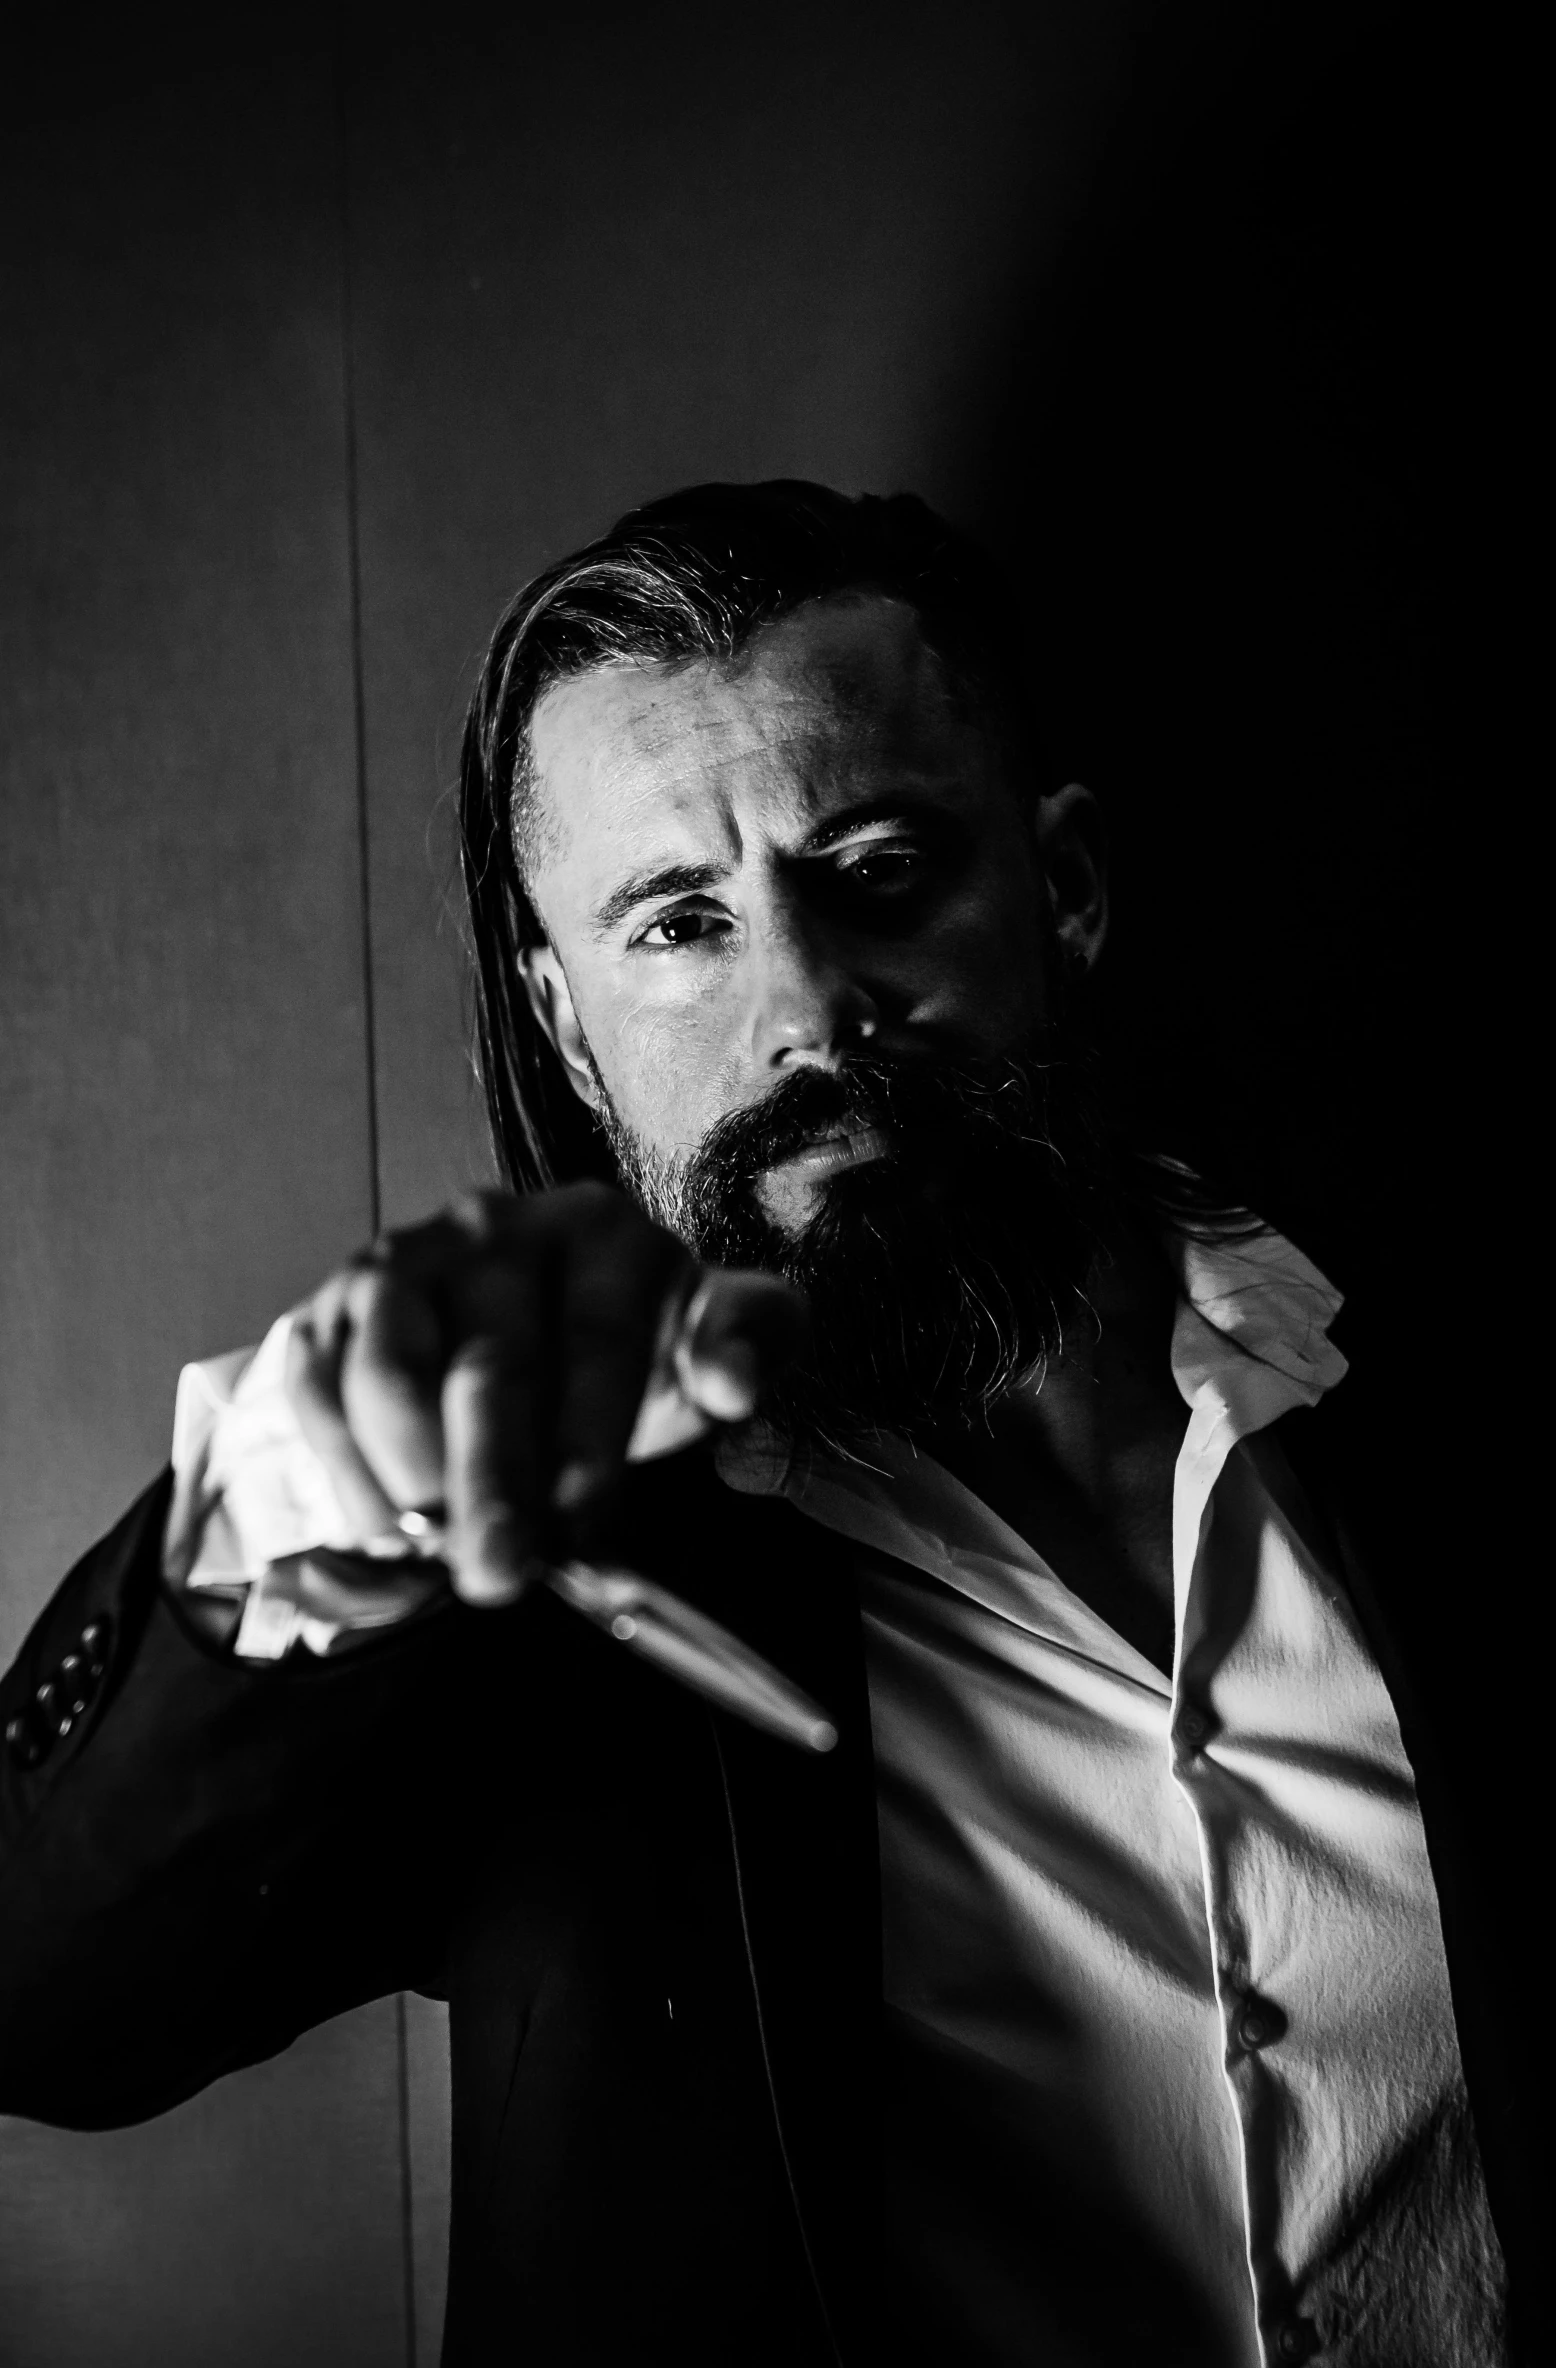 a black and white photo of a man with a beard, by Giuseppe Avanzi, till lindemann, katana in hand, john wick, square